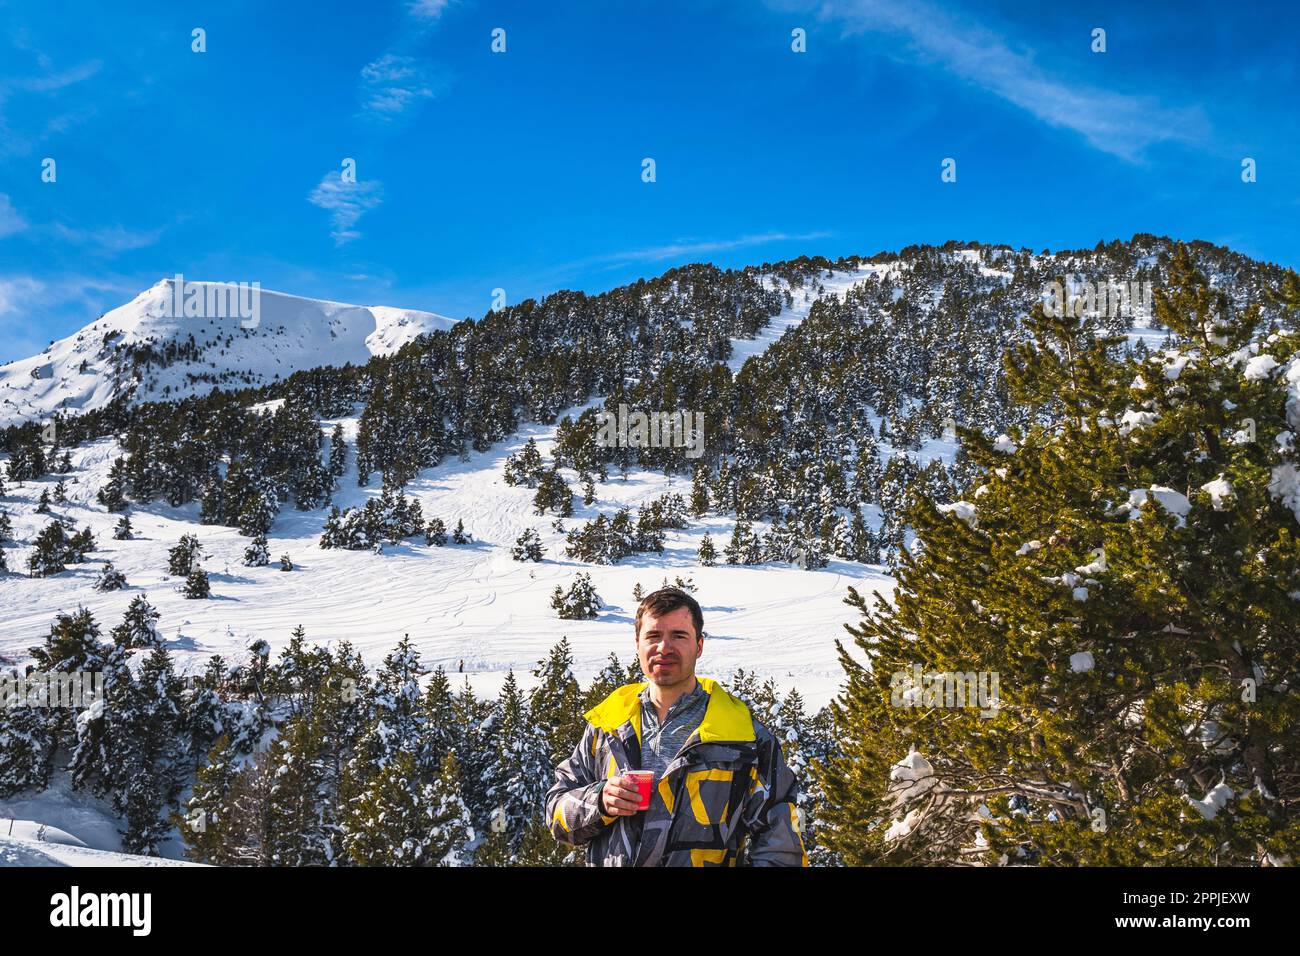 Men drinking coffee or tee with snowy forest and mountains in background, Andorra Stock Photo